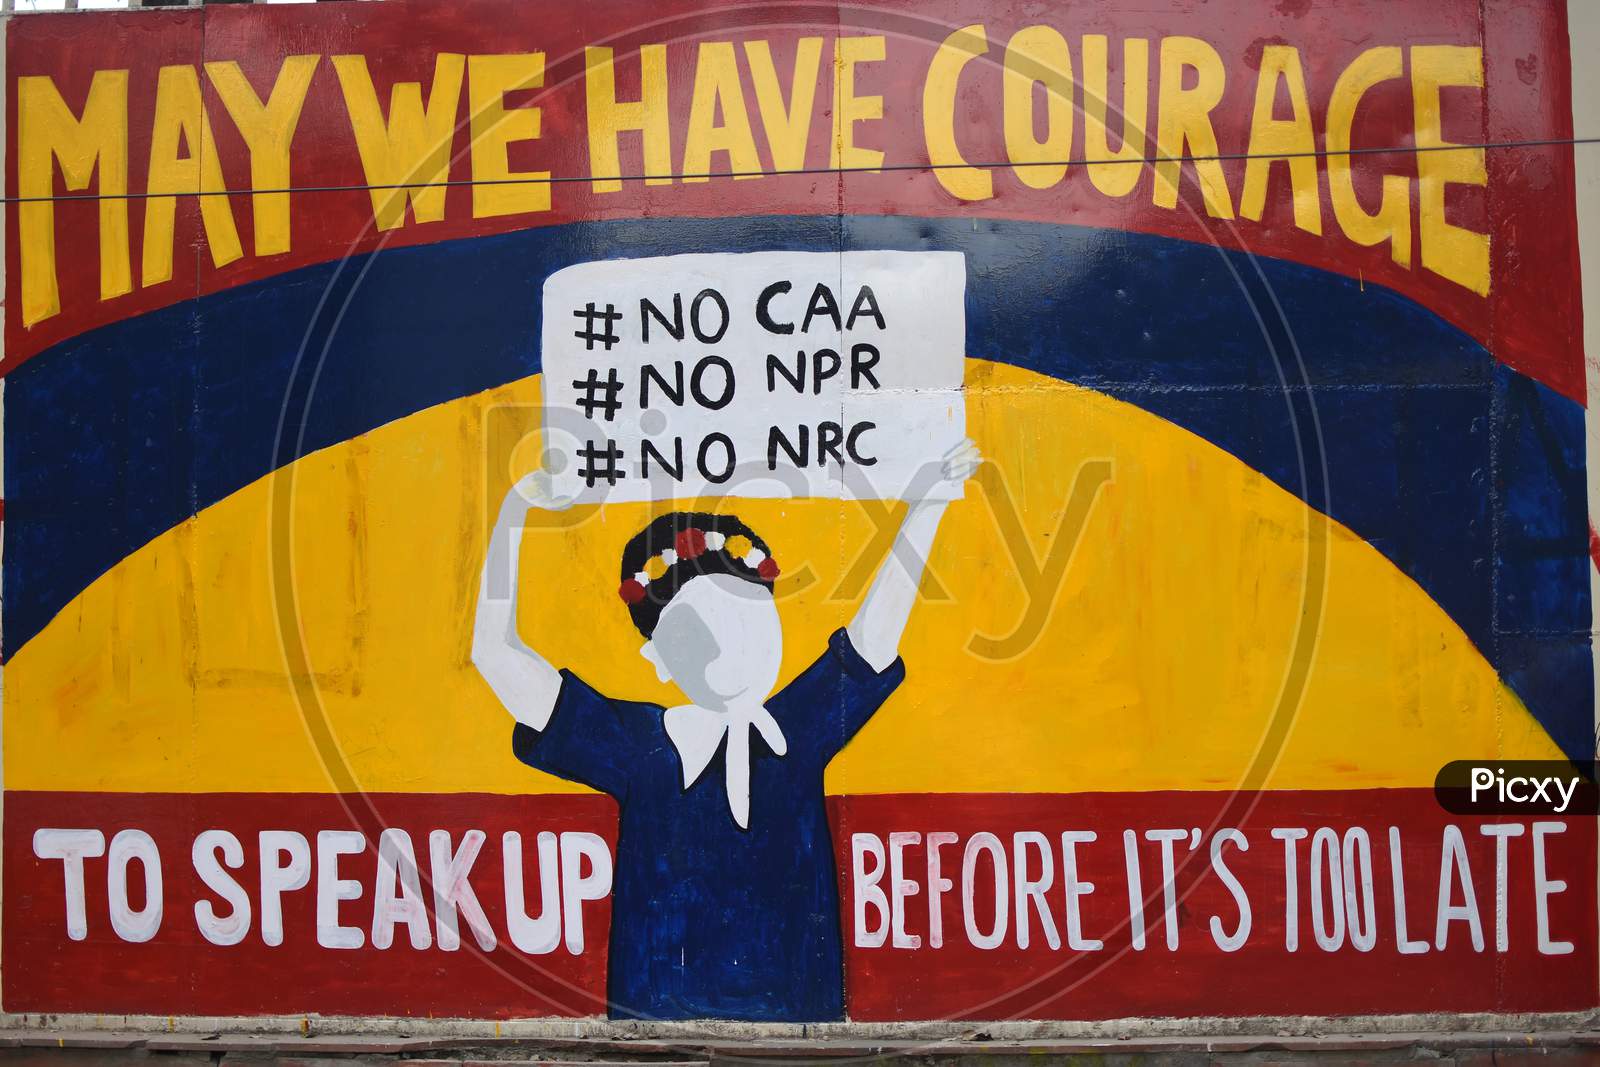 Wall Arts by Protesters During  Protest Against CAA, CAB, NPR  and NRC Amendment Bill  in Delhi